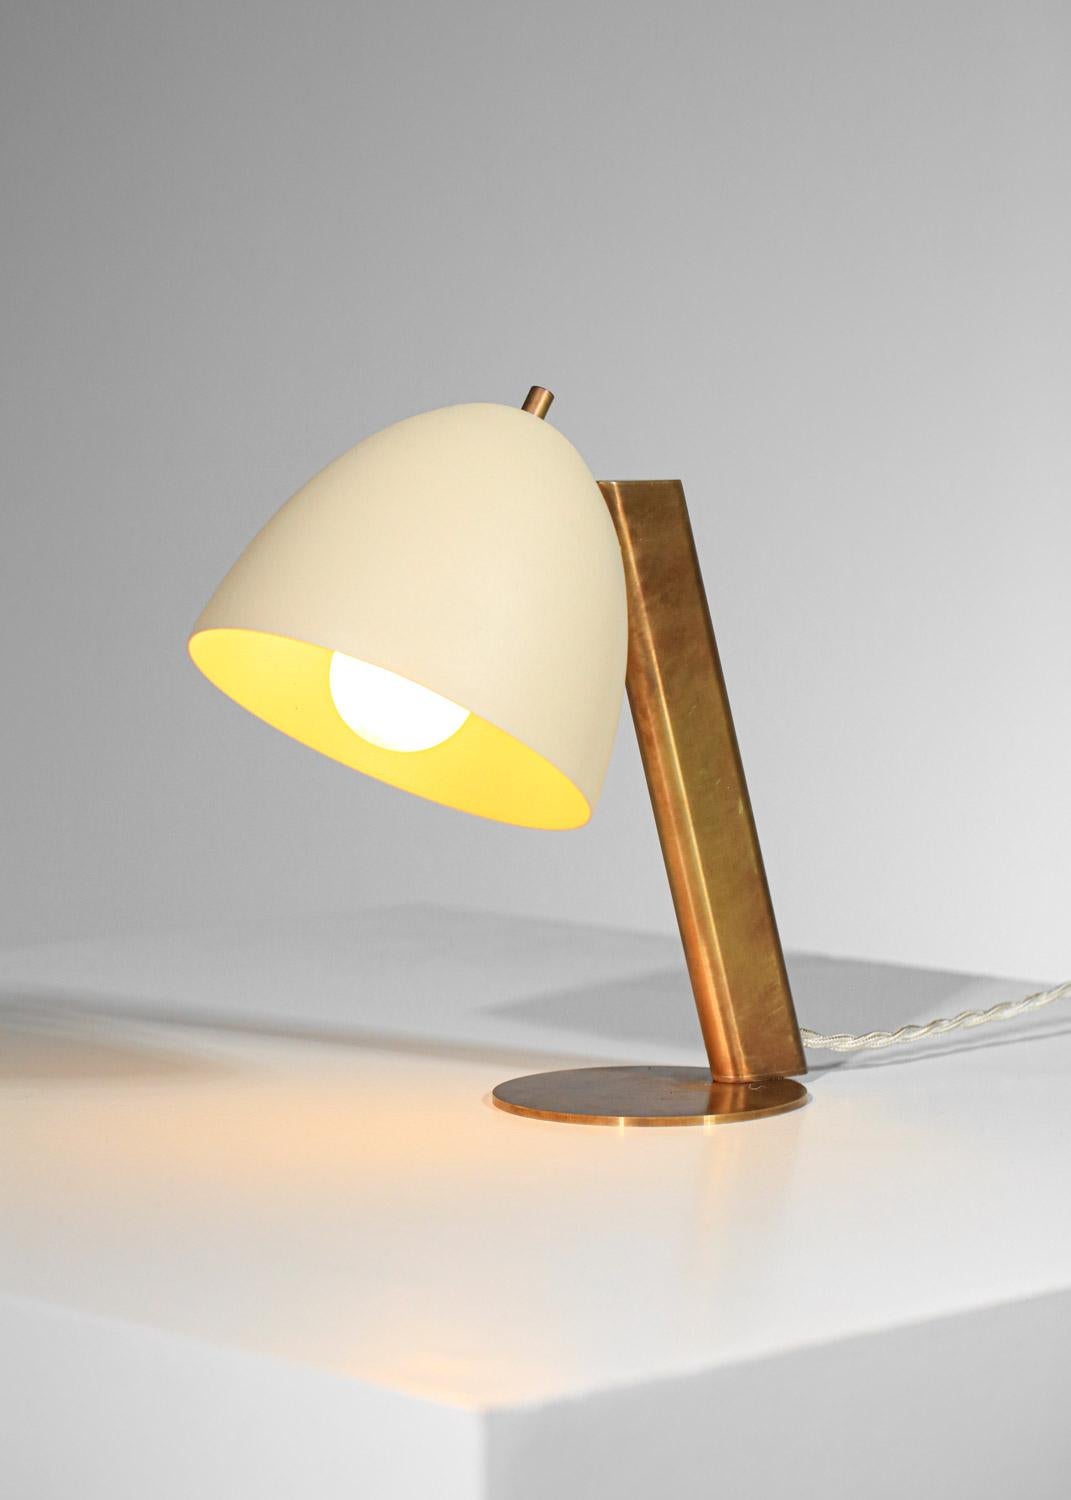 Lacquered Modern bedside lamp brass and lacquered metal, modernist style danke studio For Sale